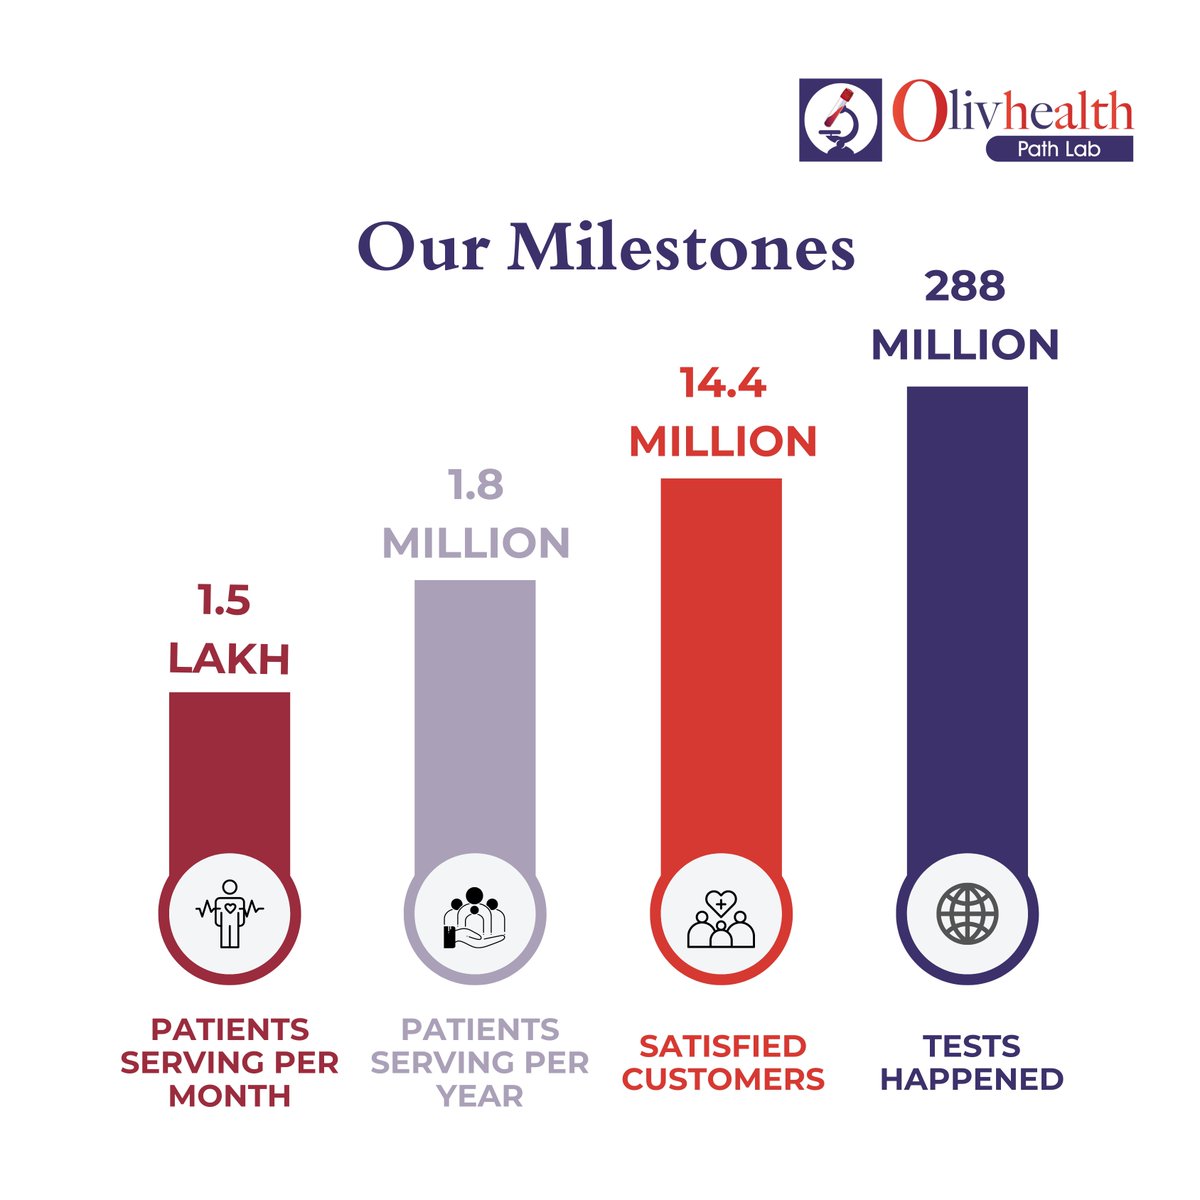 'Empowering Health, One Test at a Time! 🌟 Serving 1.5 lakh patients monthly, with 14.4 million satisfied customers since 2016. Journey of care.'

#OlivHealthPathLab #PathLab #HealthcareHeroes #ourjourney #GyaanSeDhyaanSe